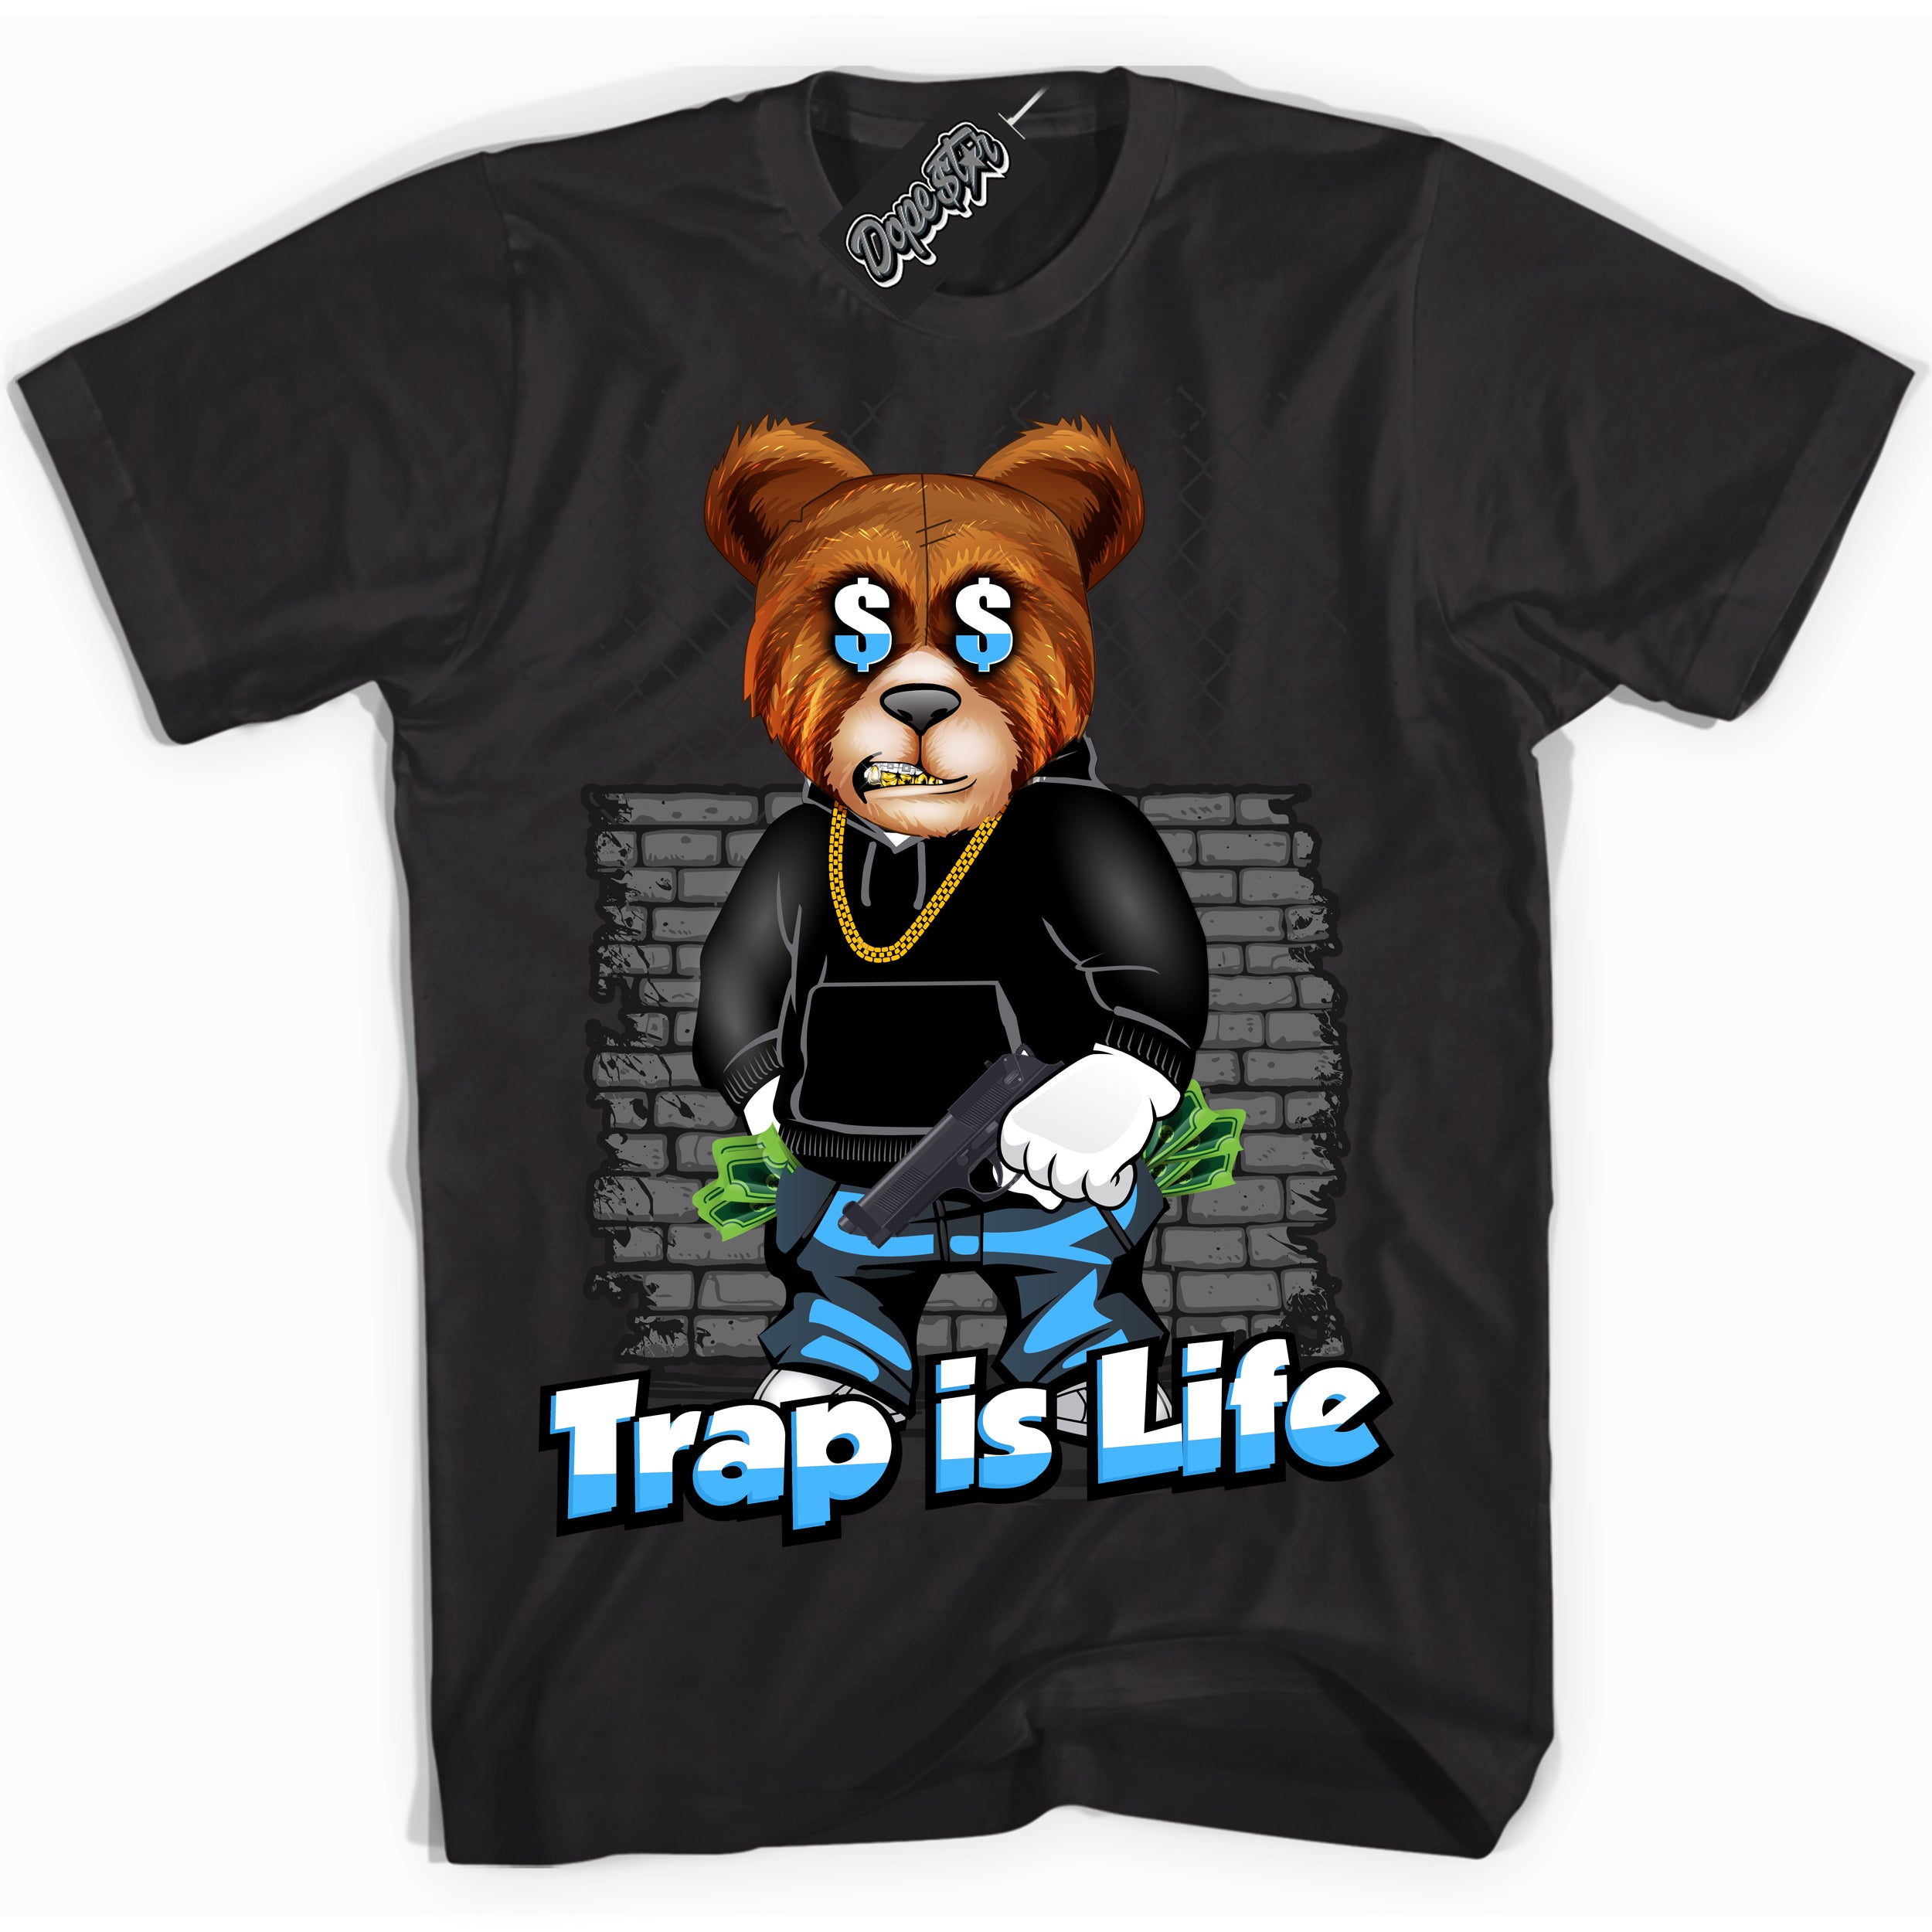 Cool Black graphic tee with “ Trap Is Life ” design, that perfectly matches Powder Blue 9s sneakers 